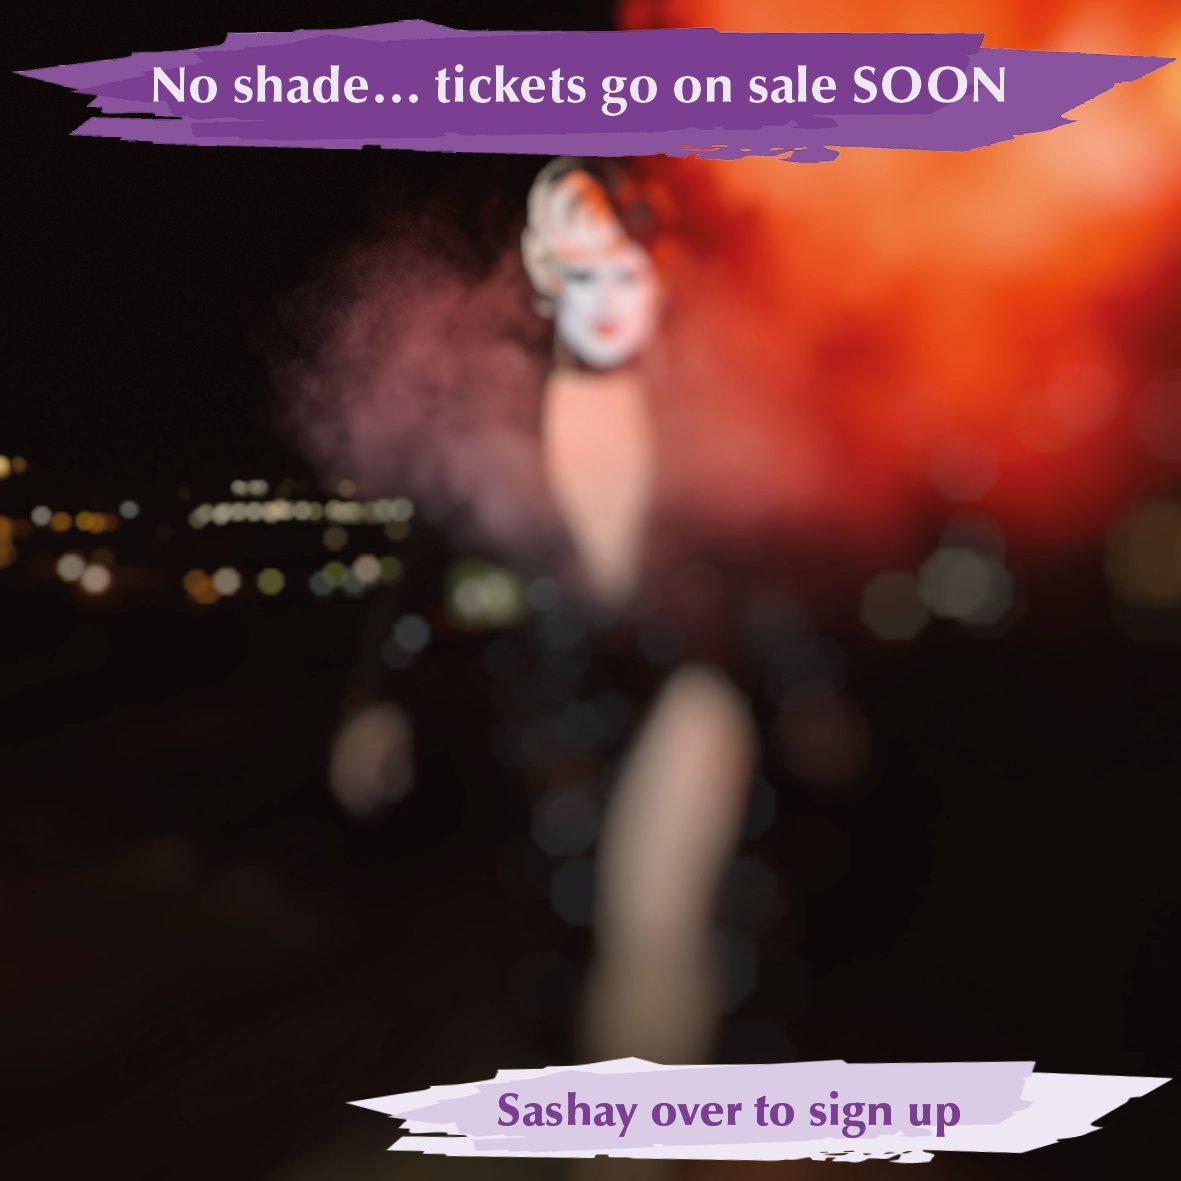 No shade, tickets go on sale TOMORROW for our ALL NEW event 💅💋🥂 Sign up to be the first to know more 🤫 we'll only have limited tickets available so get in QUICK ✨ Sashay over to sign up ➡️ via the link in our bio